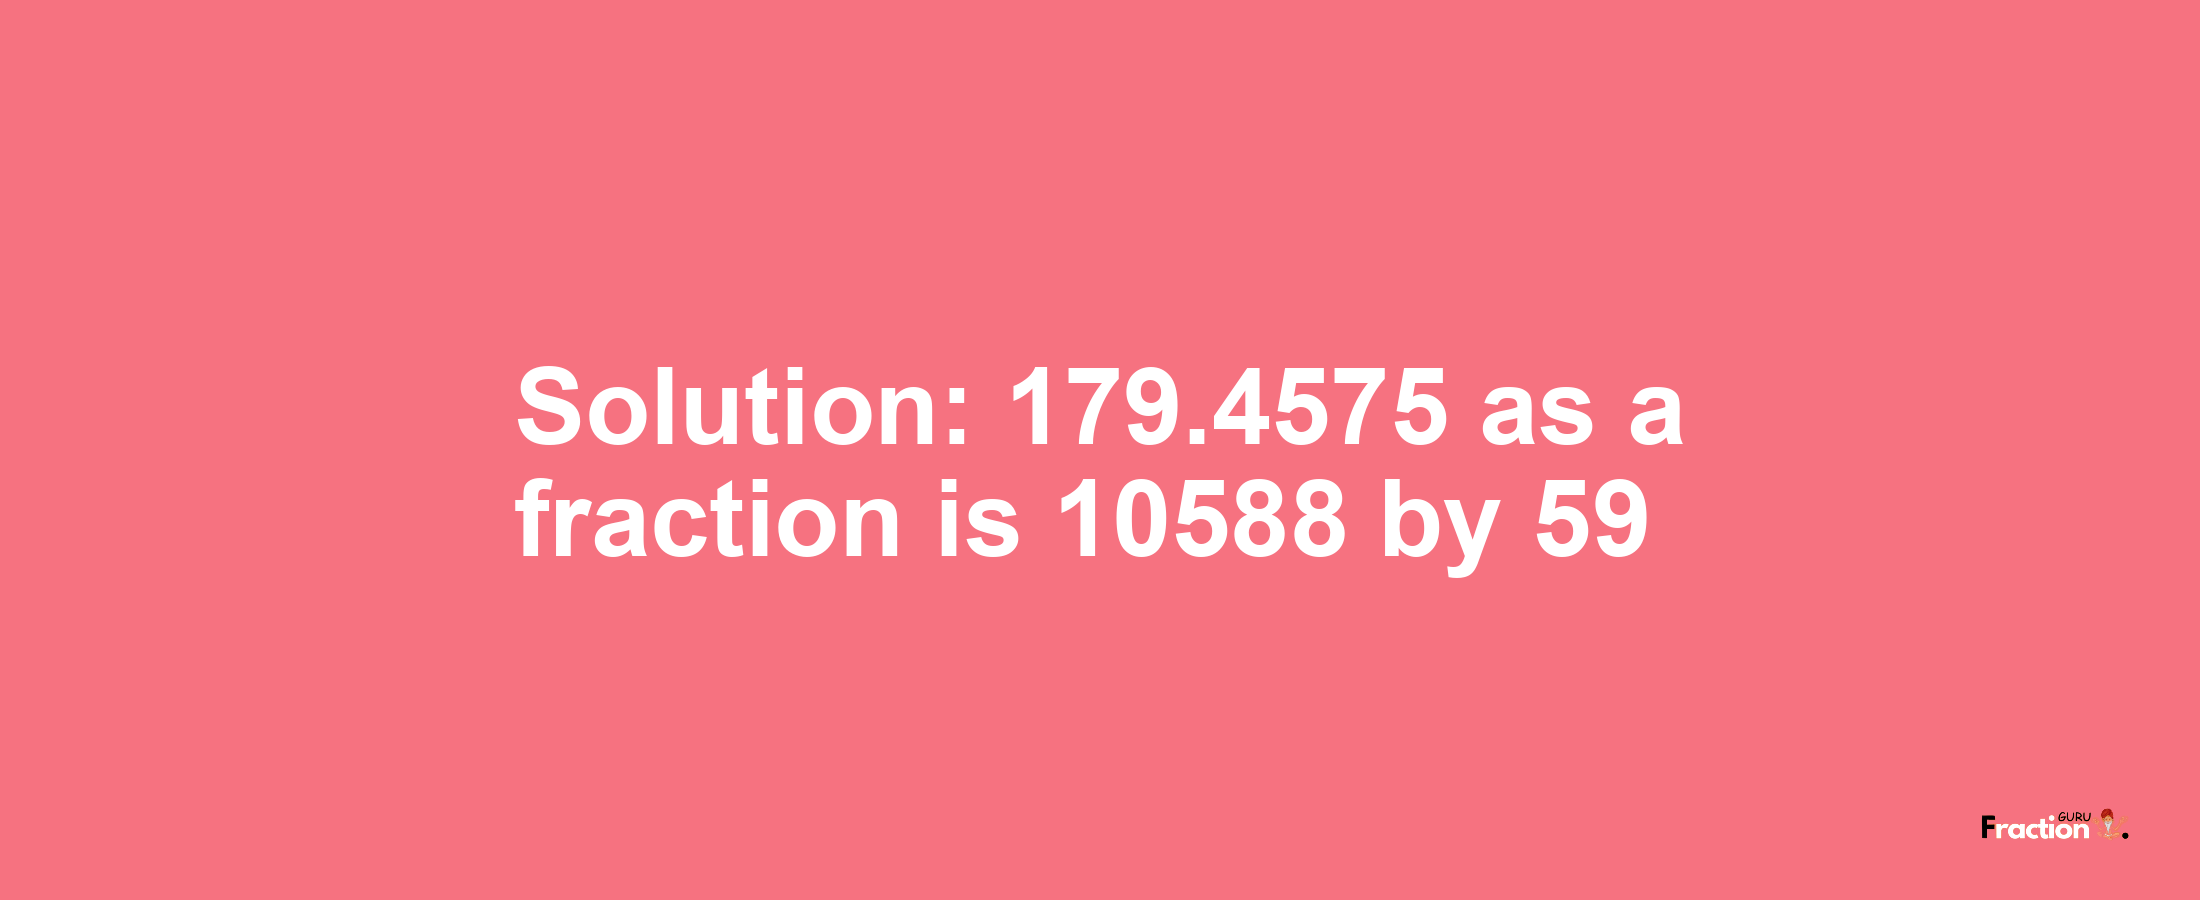 Solution:179.4575 as a fraction is 10588/59